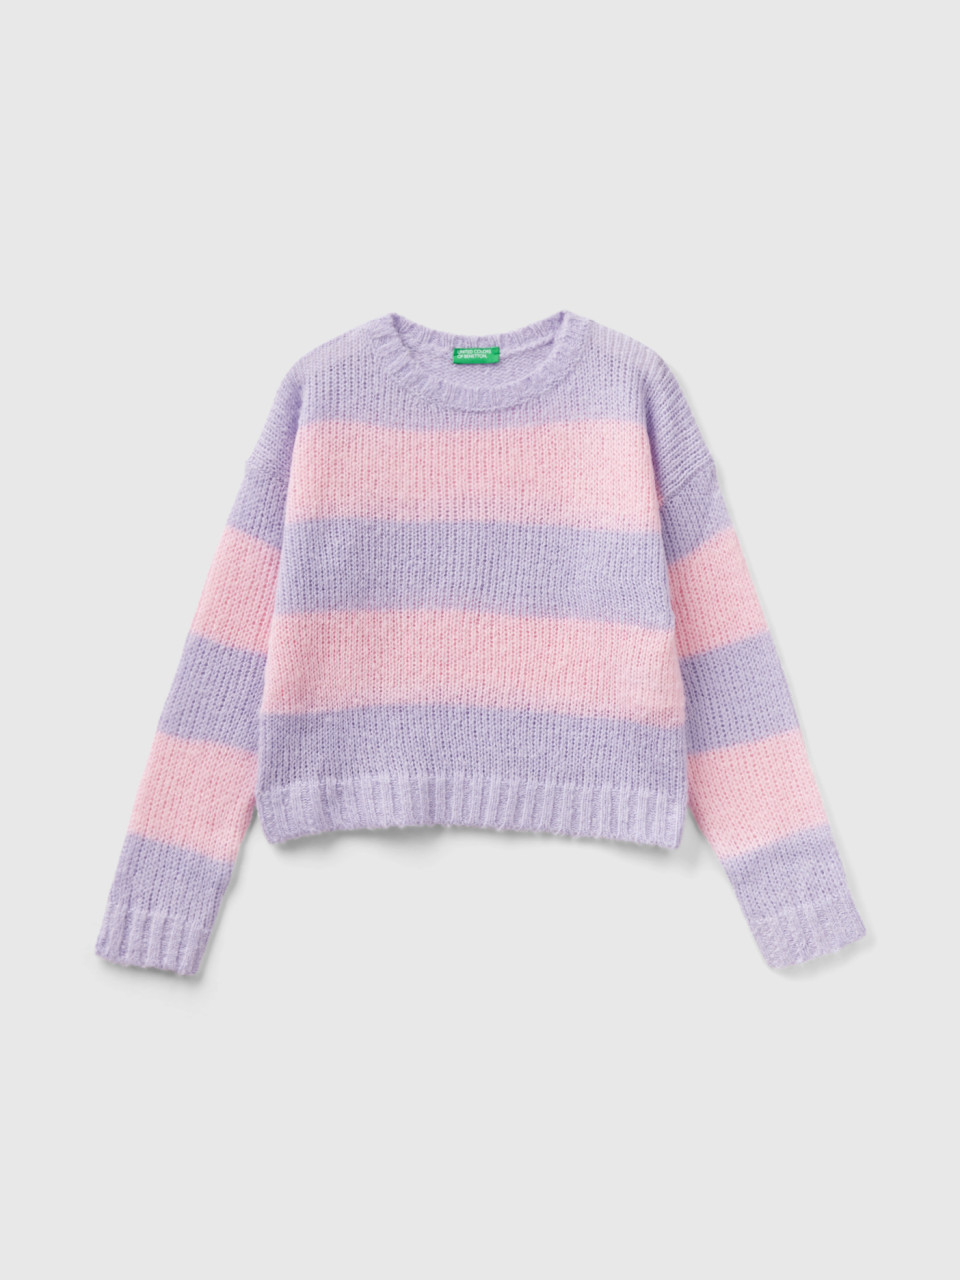 Benetton, Sweater With Two-tone Stripes, Lilac, Kids